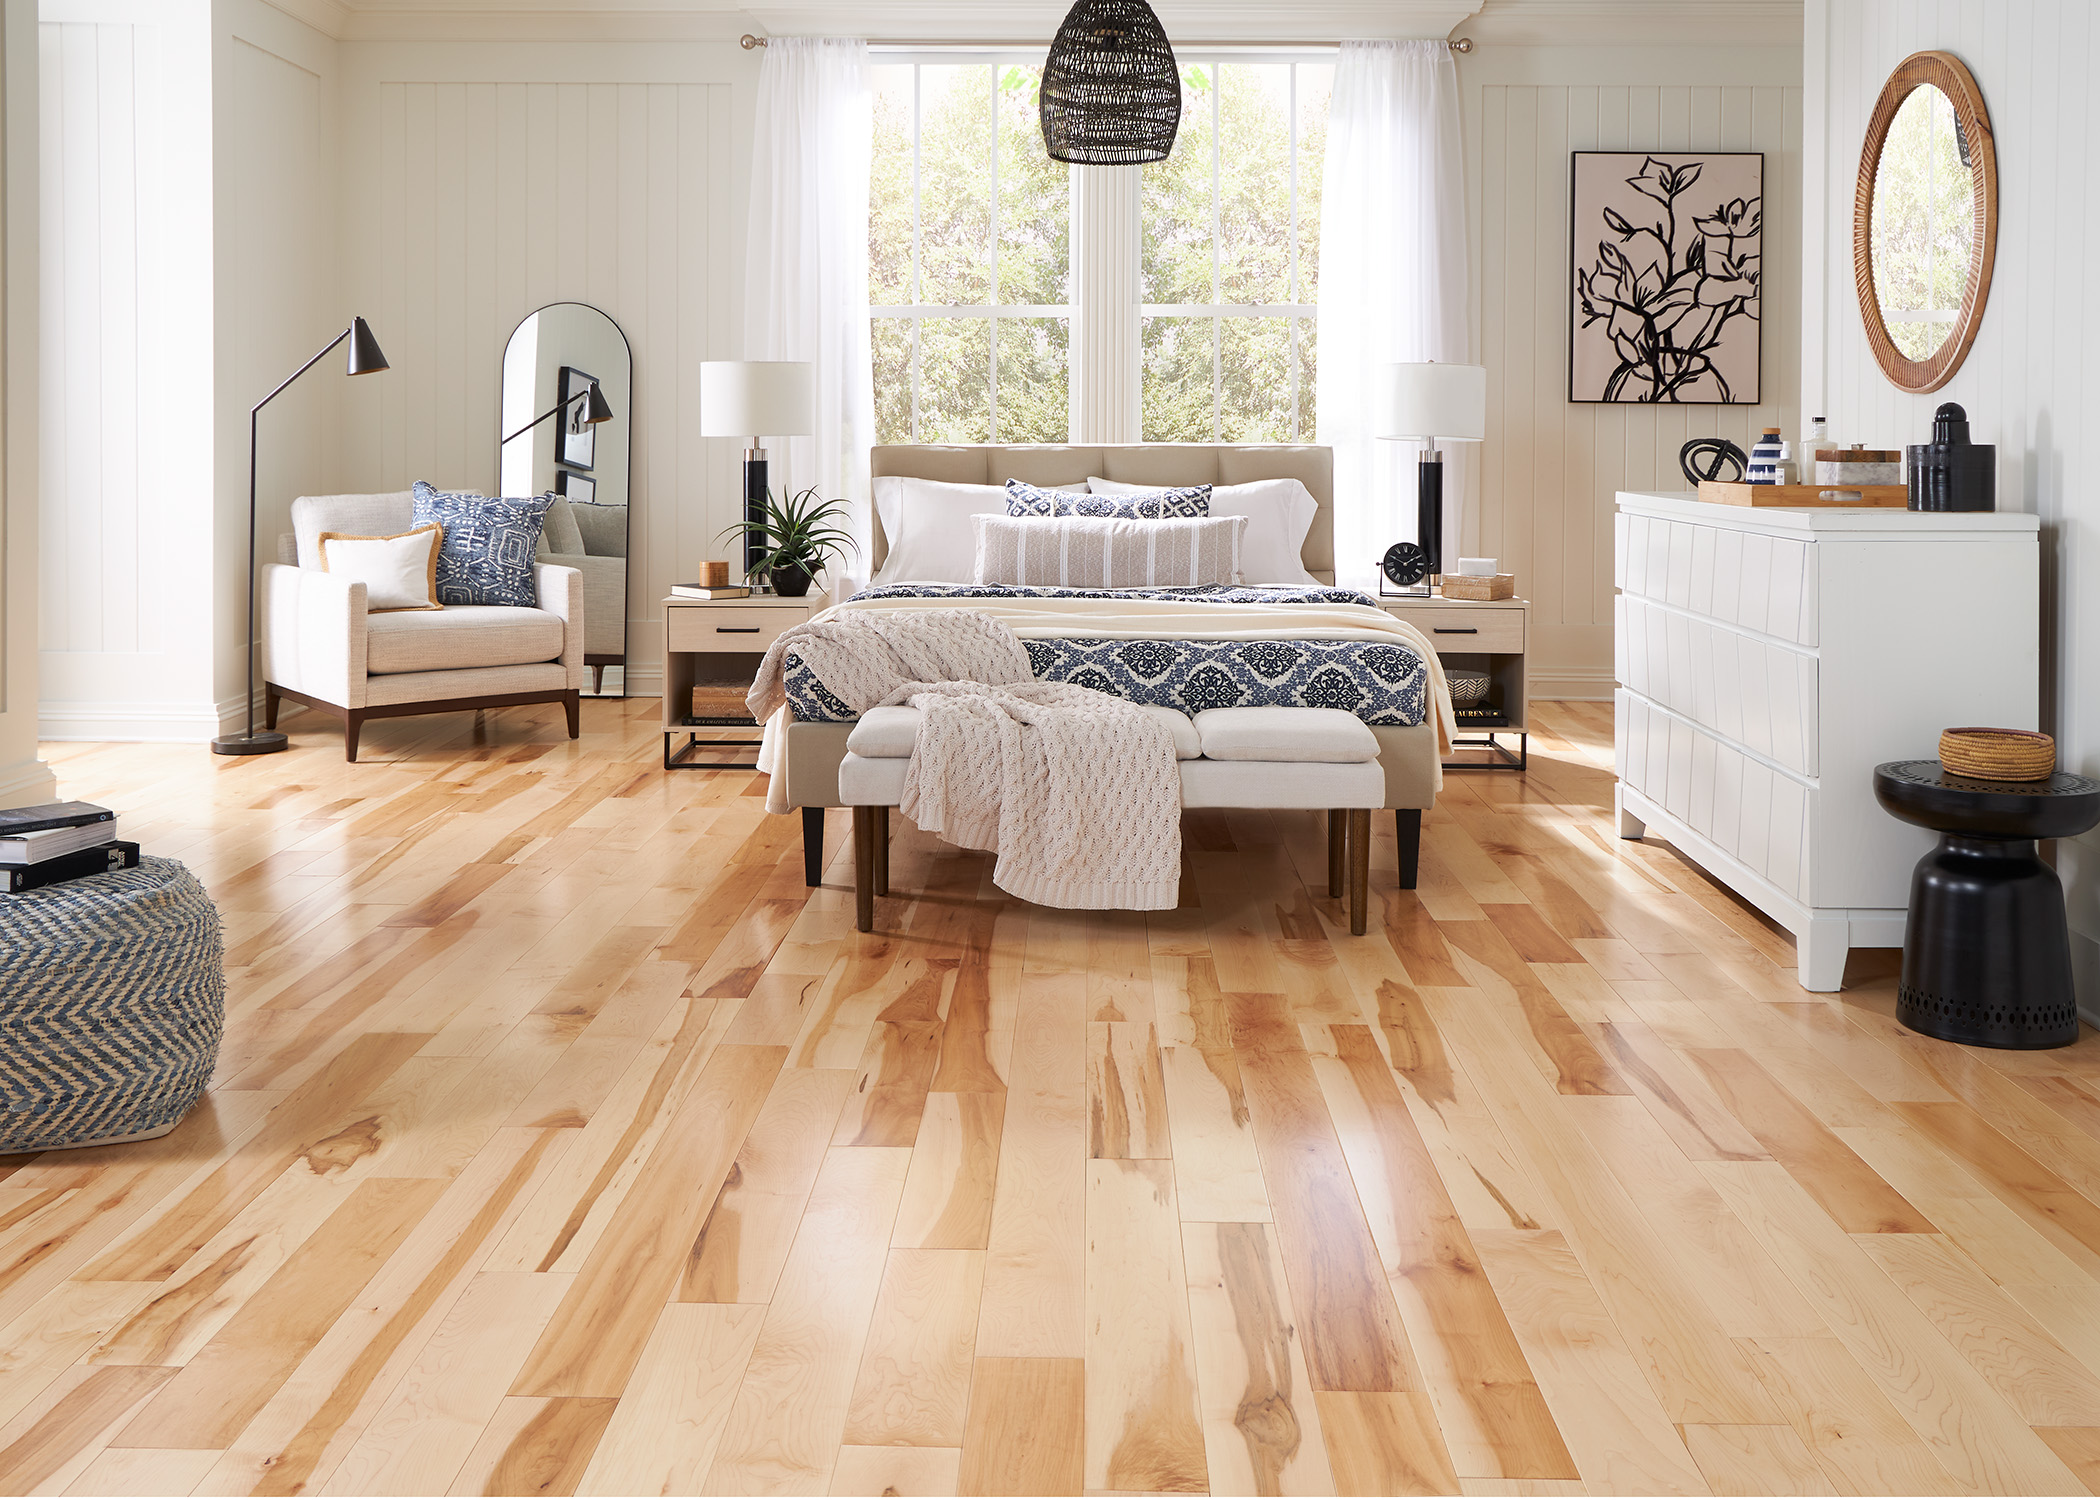 a bedroom with hardwood flooring shows distinct style